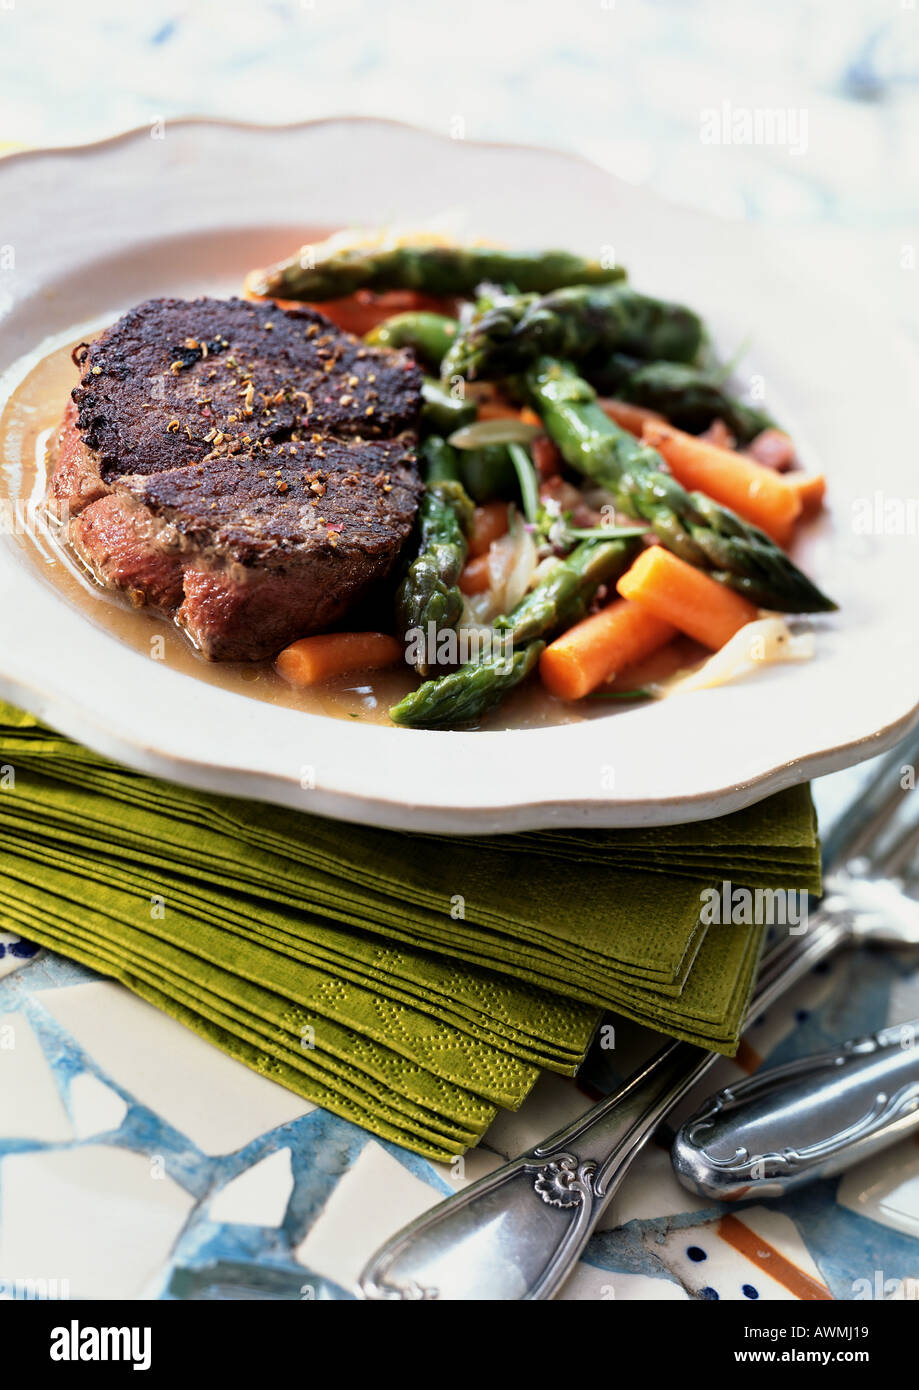 Steak with asparagus and carrots on plate, close-up Stock Photo